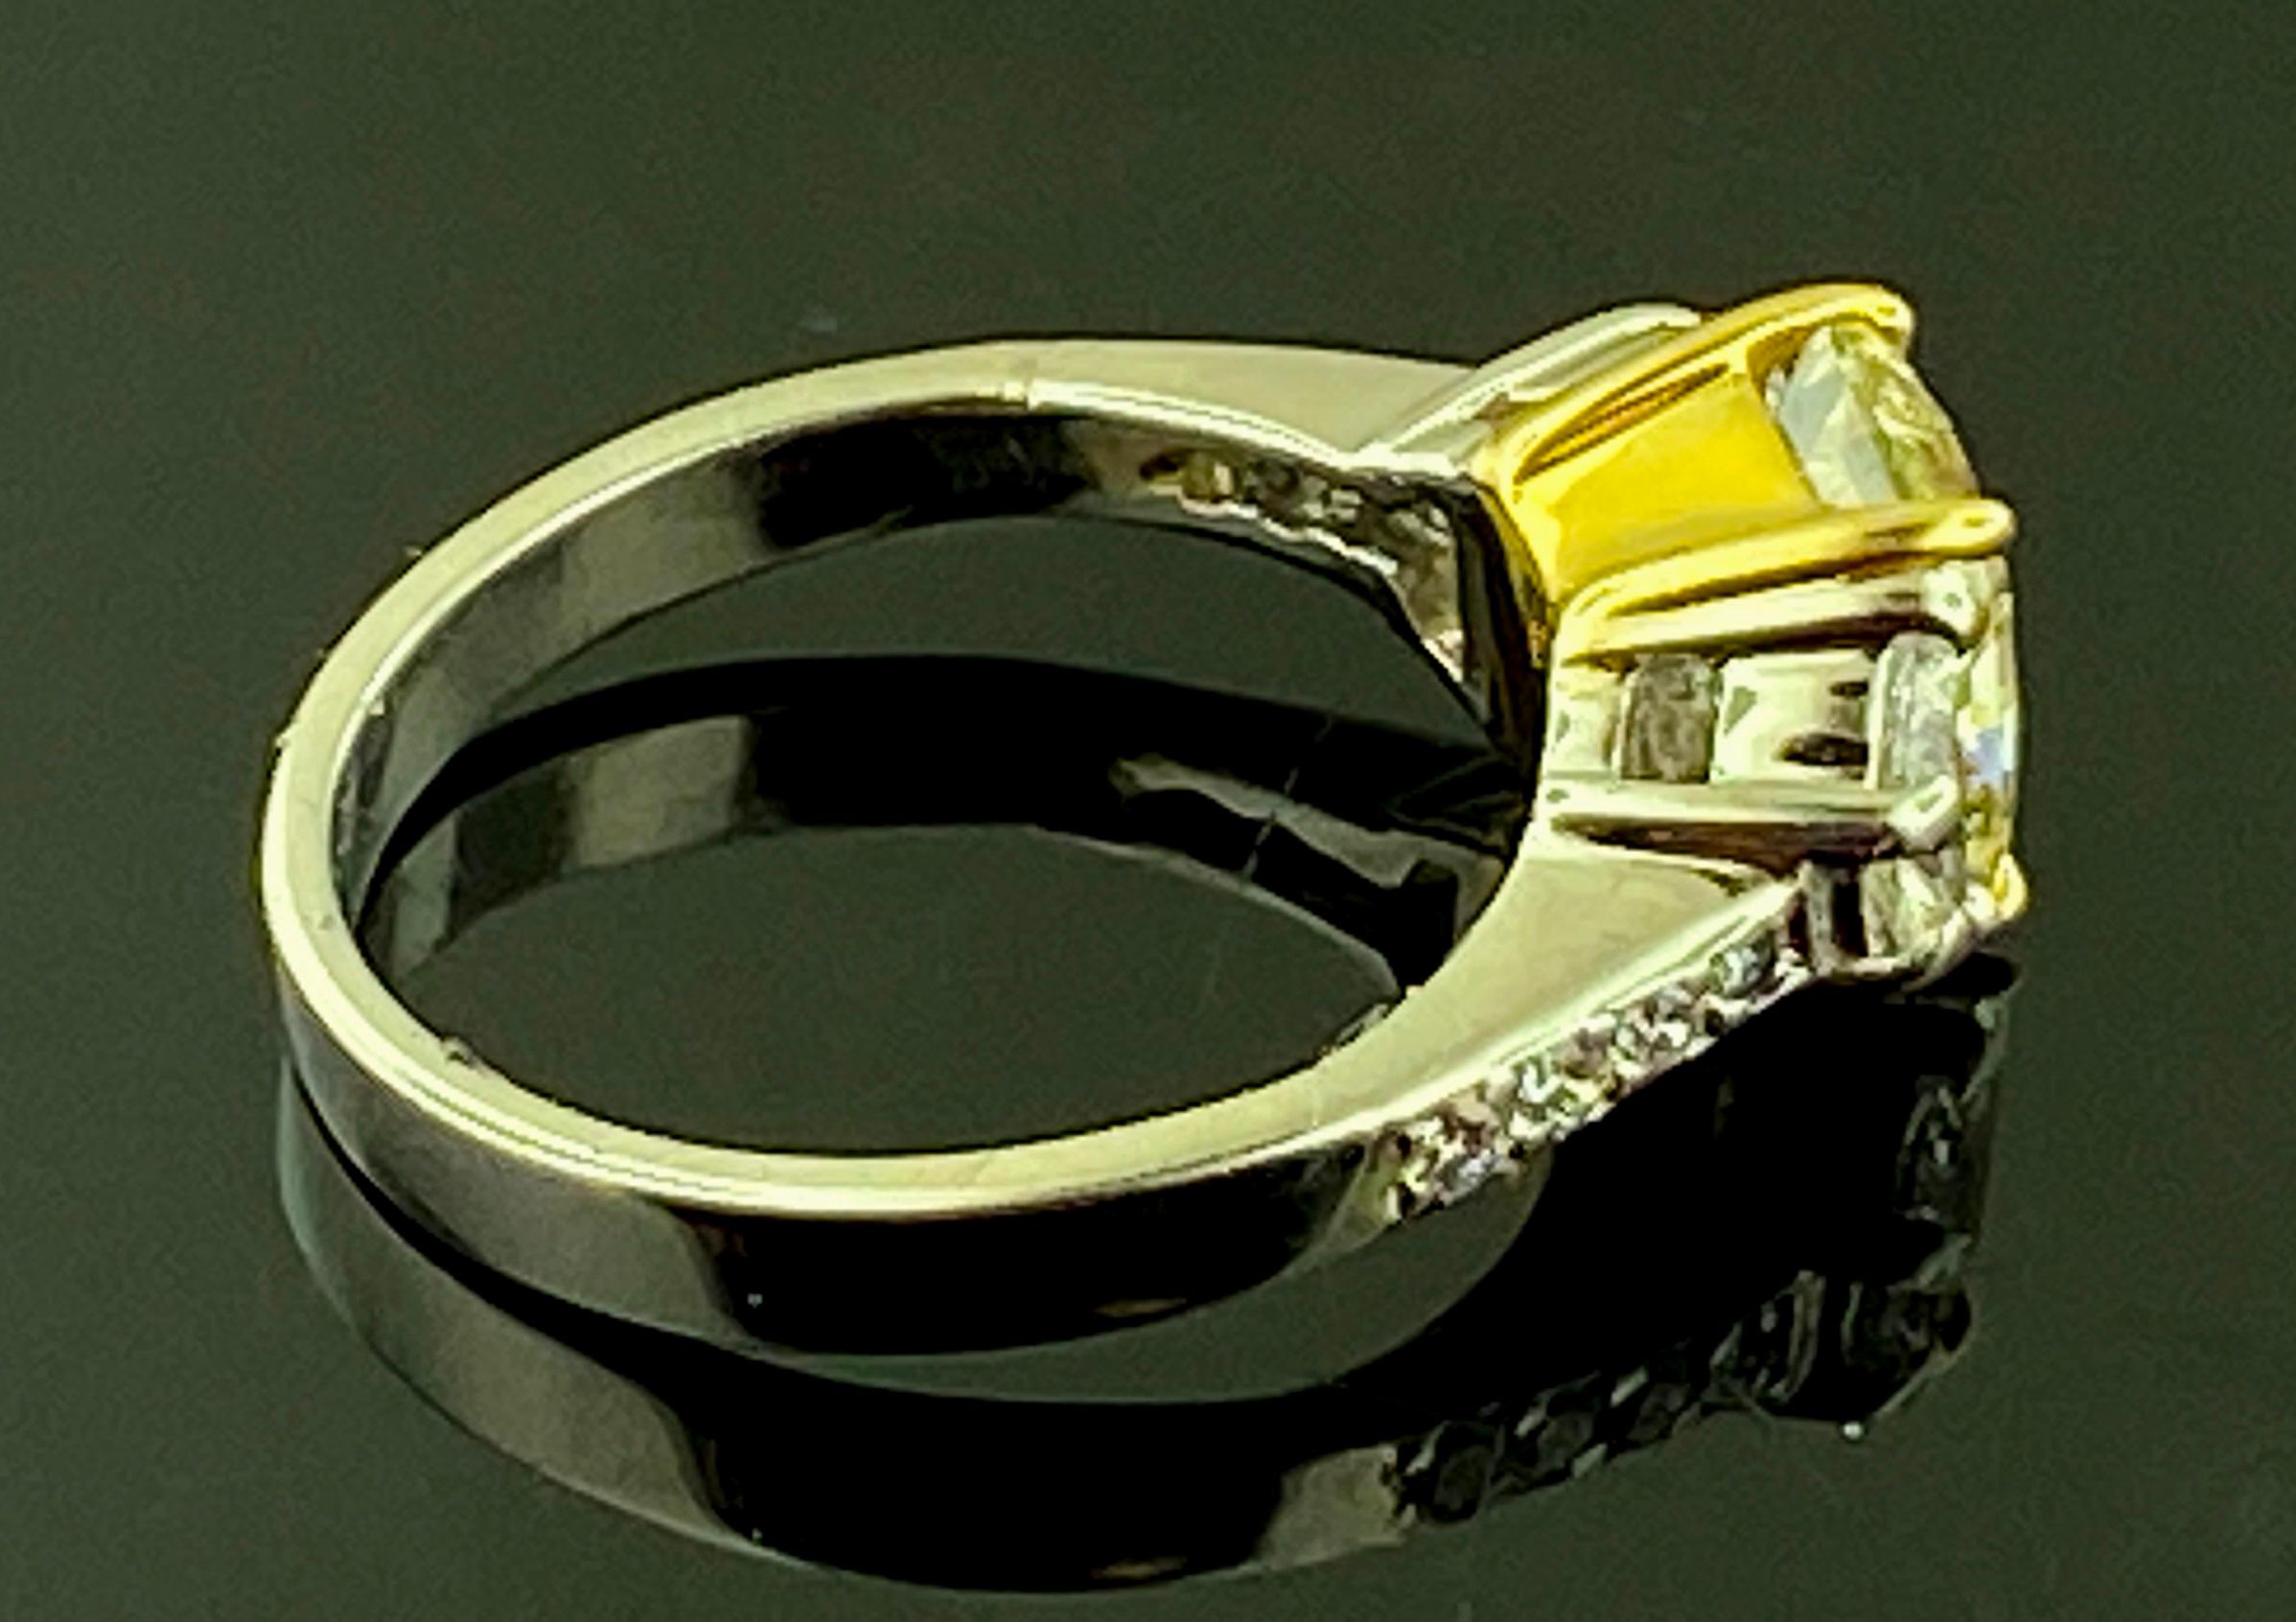 22 KT Yellow Gold & Platinum 1.82 Ct Fancy Yellow Radiant Cut Diamond Ring For Sale 1